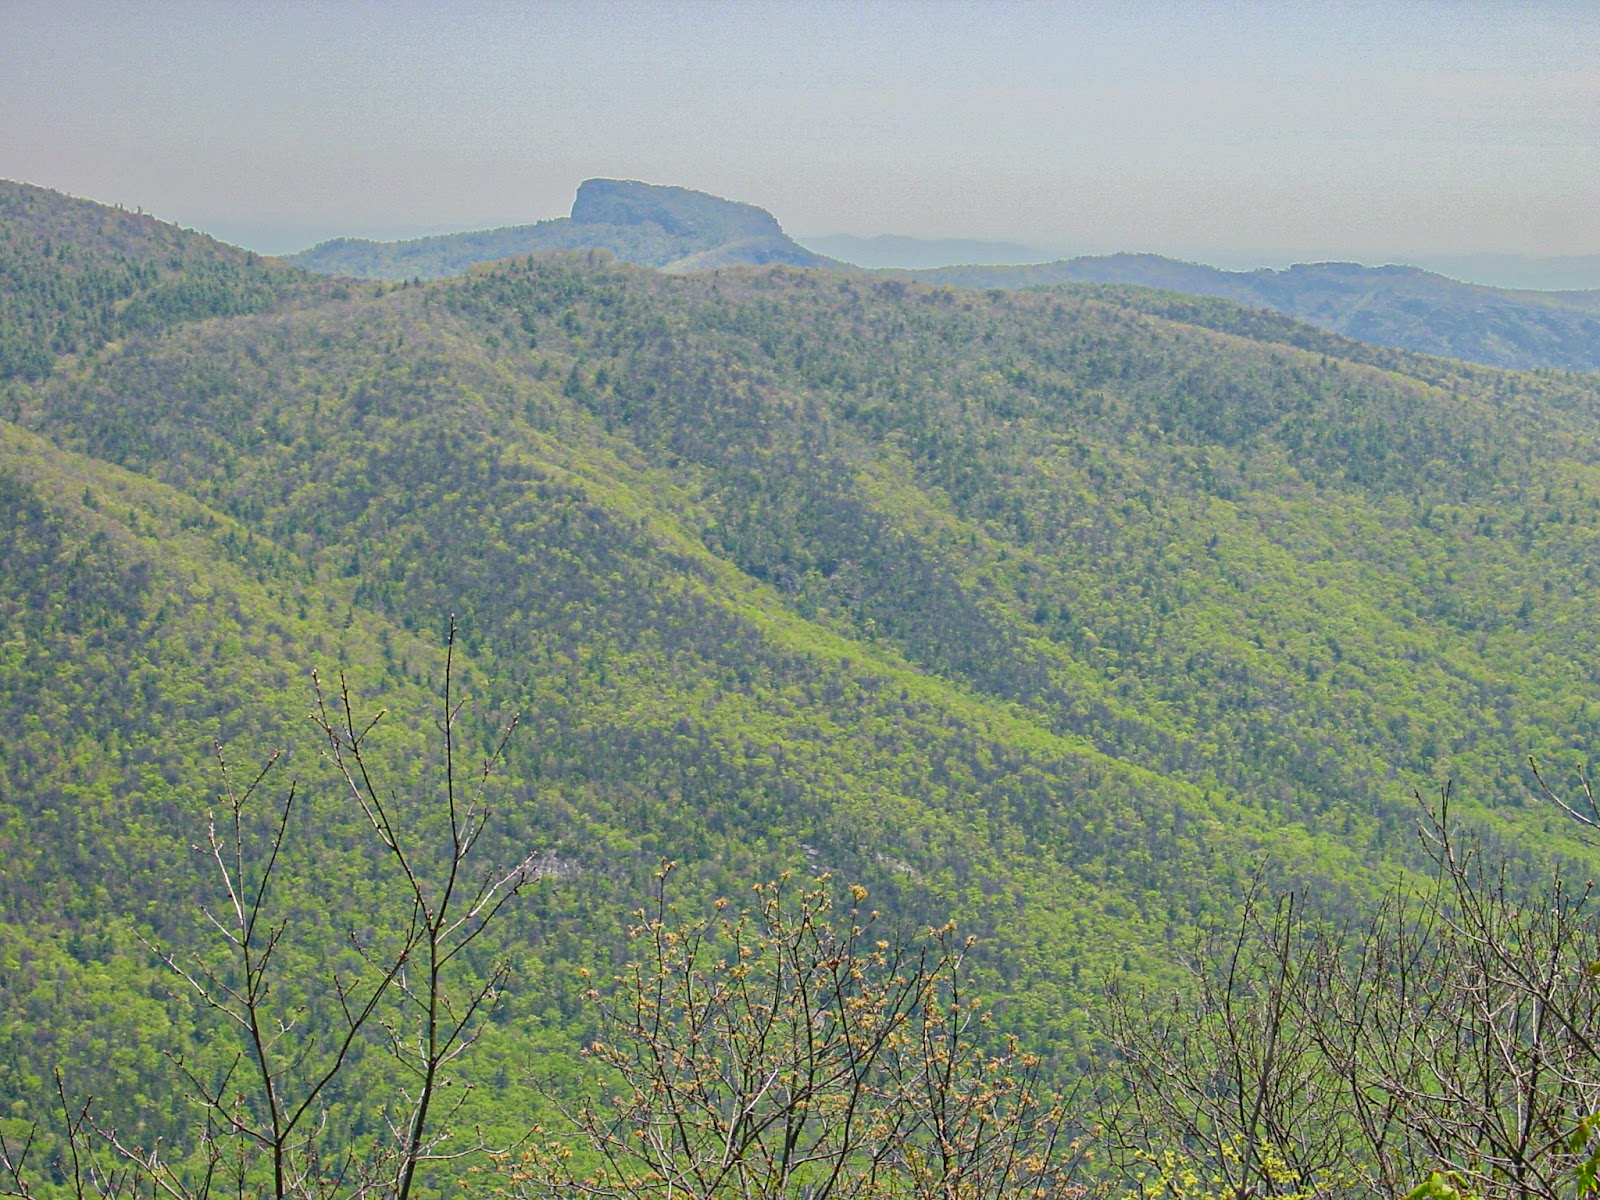 A mesa style peak surrounded by the contour of green hills with shrubs in the foreground. 